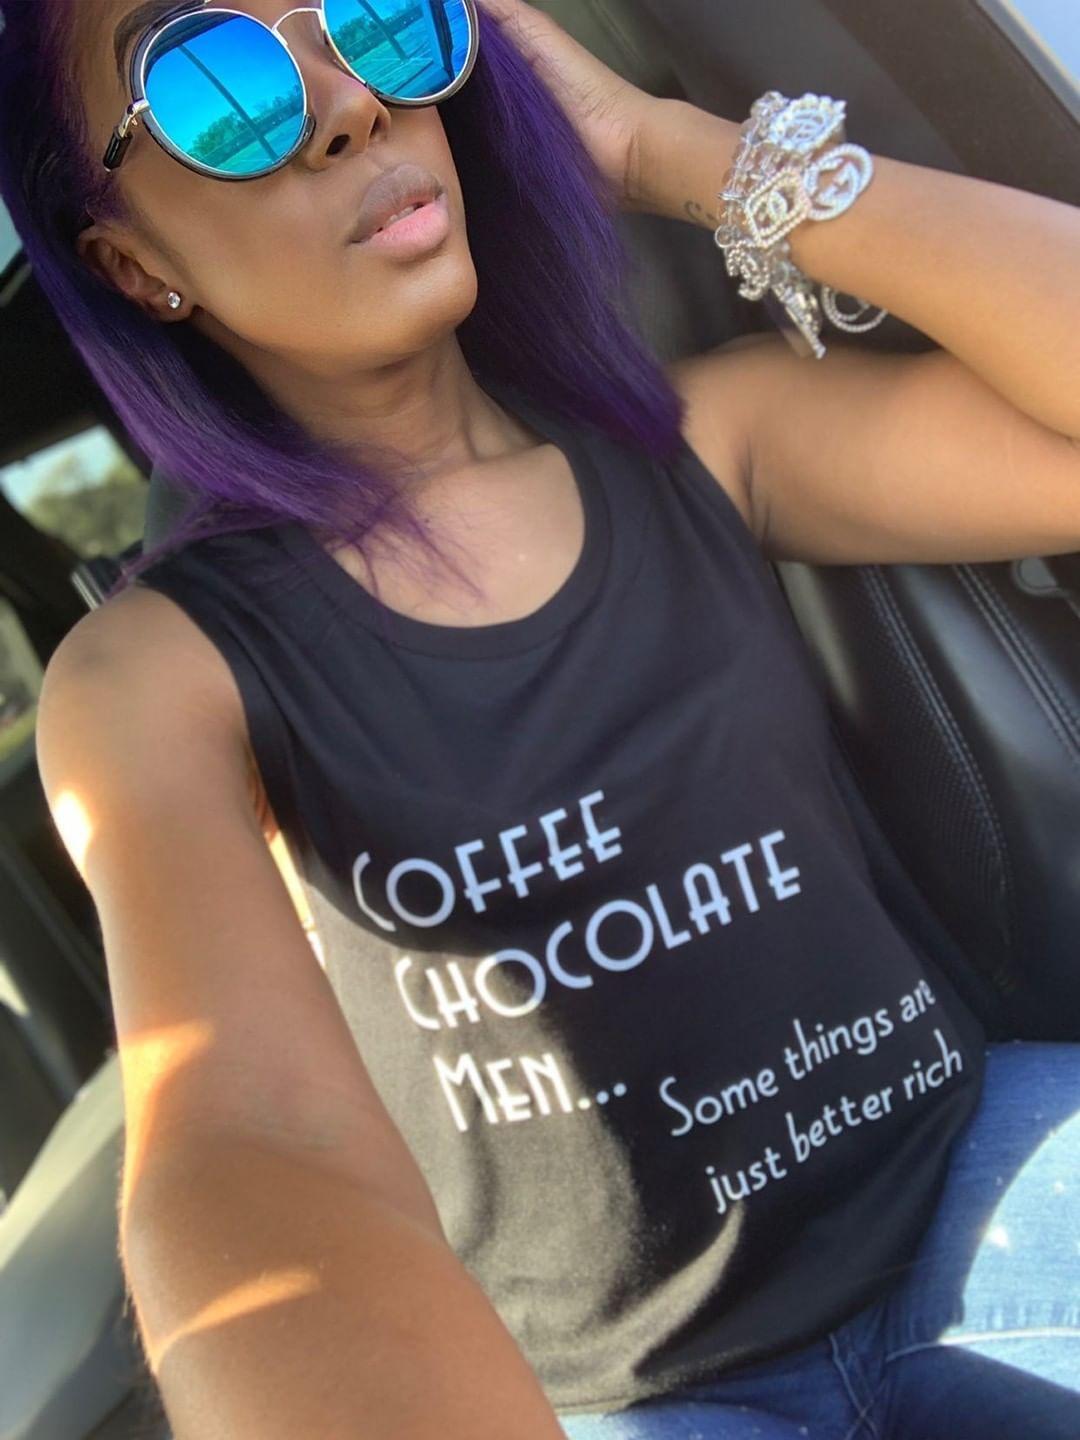 Coffee Chocolate Men Some Things Are Just Better Rich Shirt